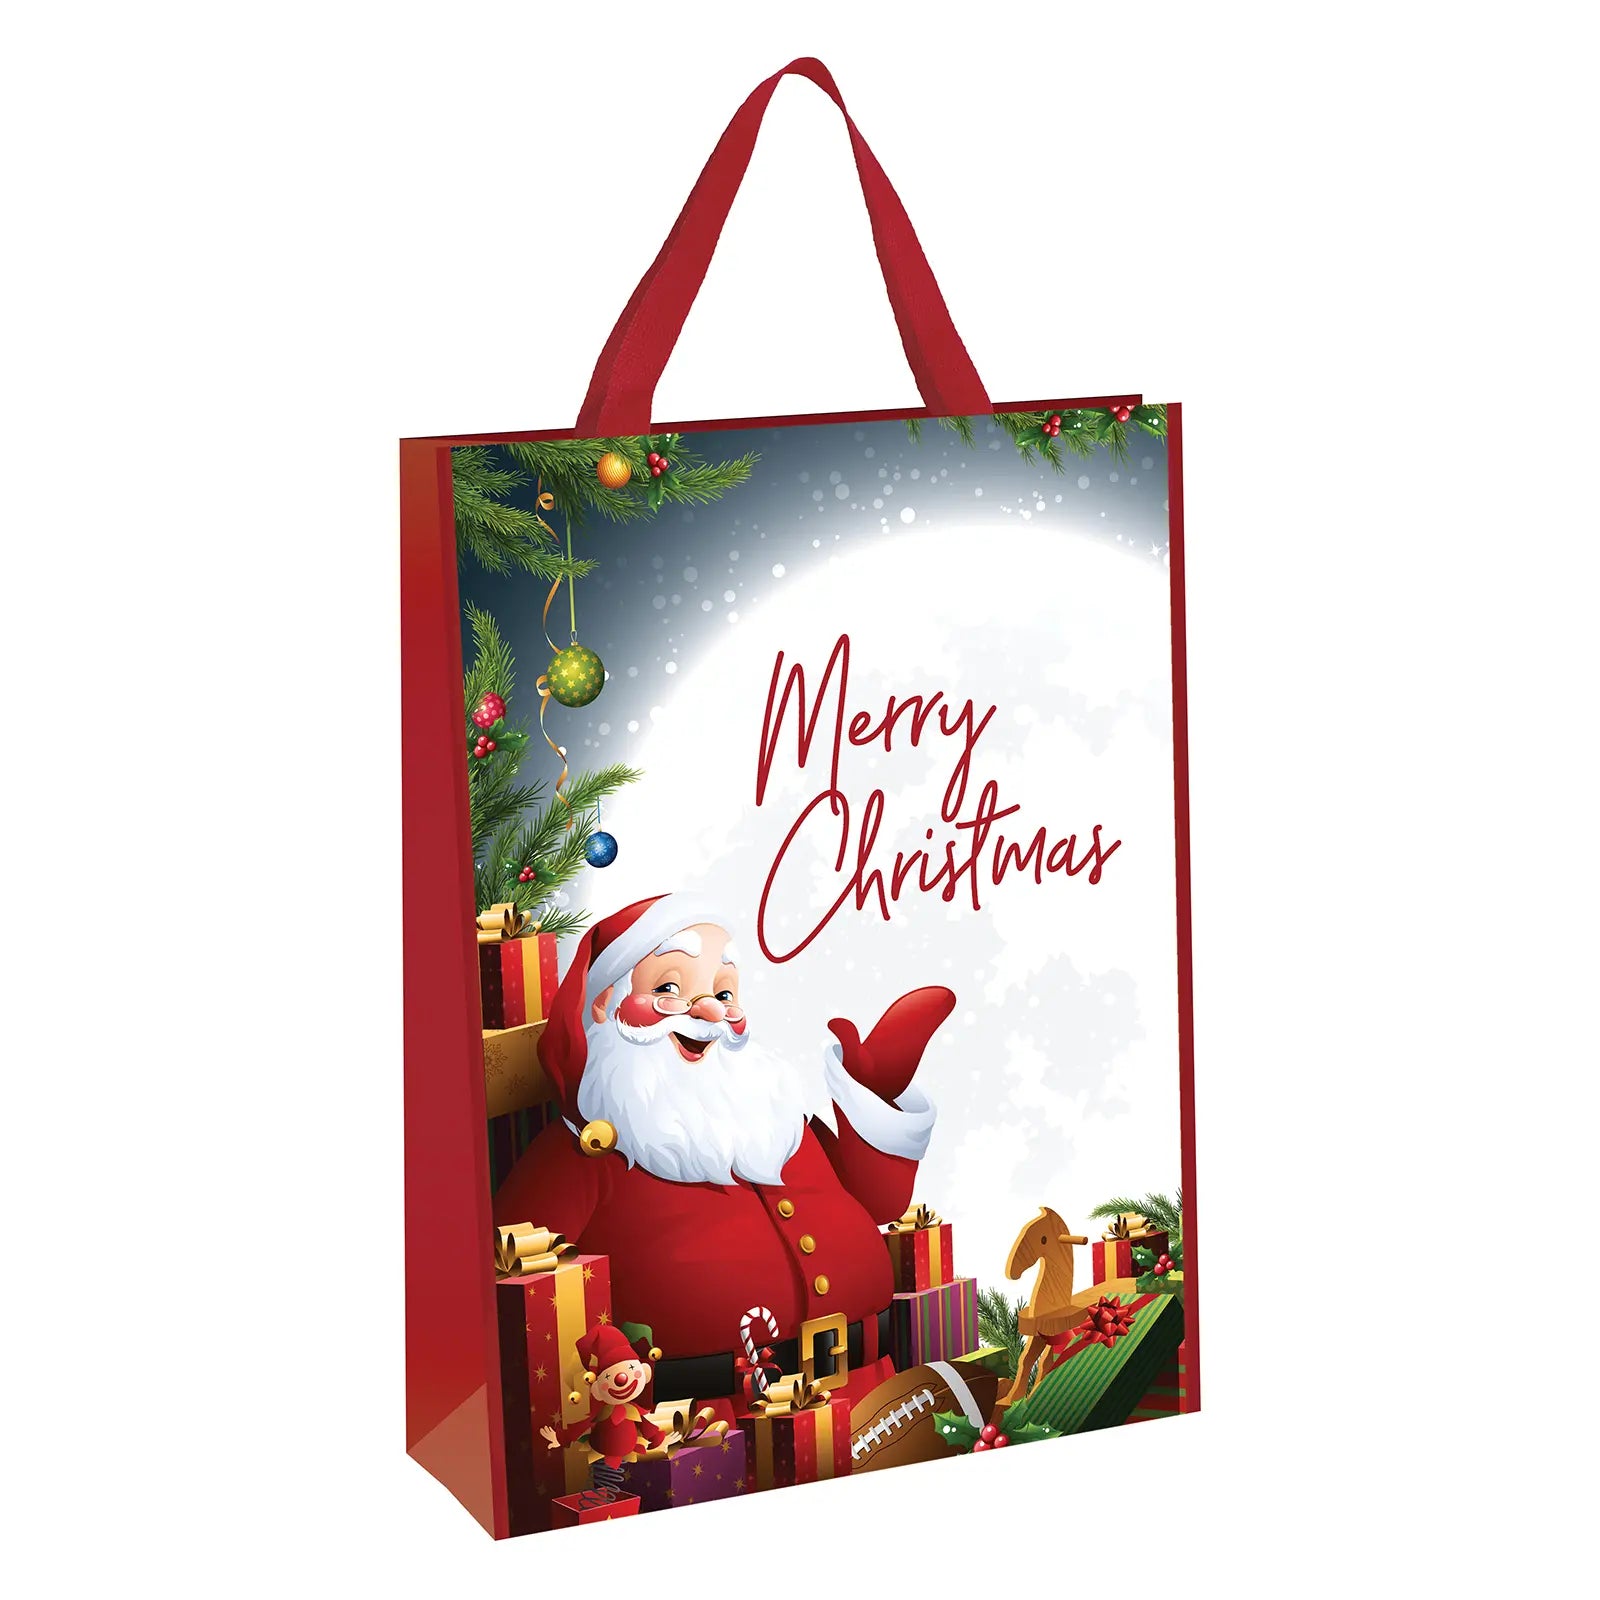 Red merry christmas gift bag featuring novelty santa claus design with wooden toys